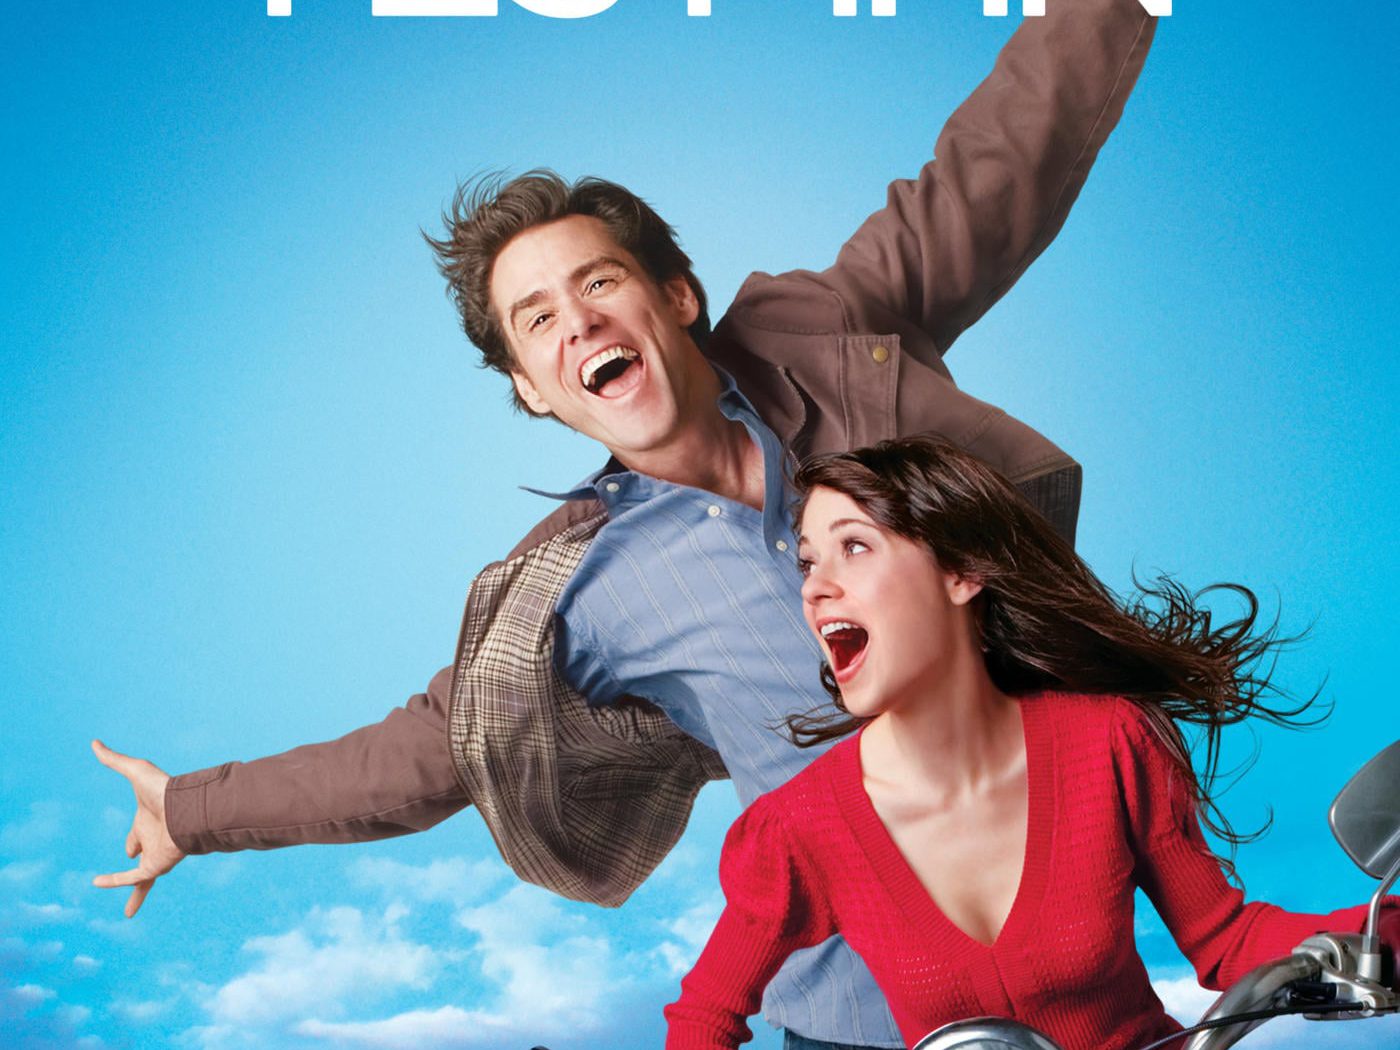 Poster for the movie "Yes Man"